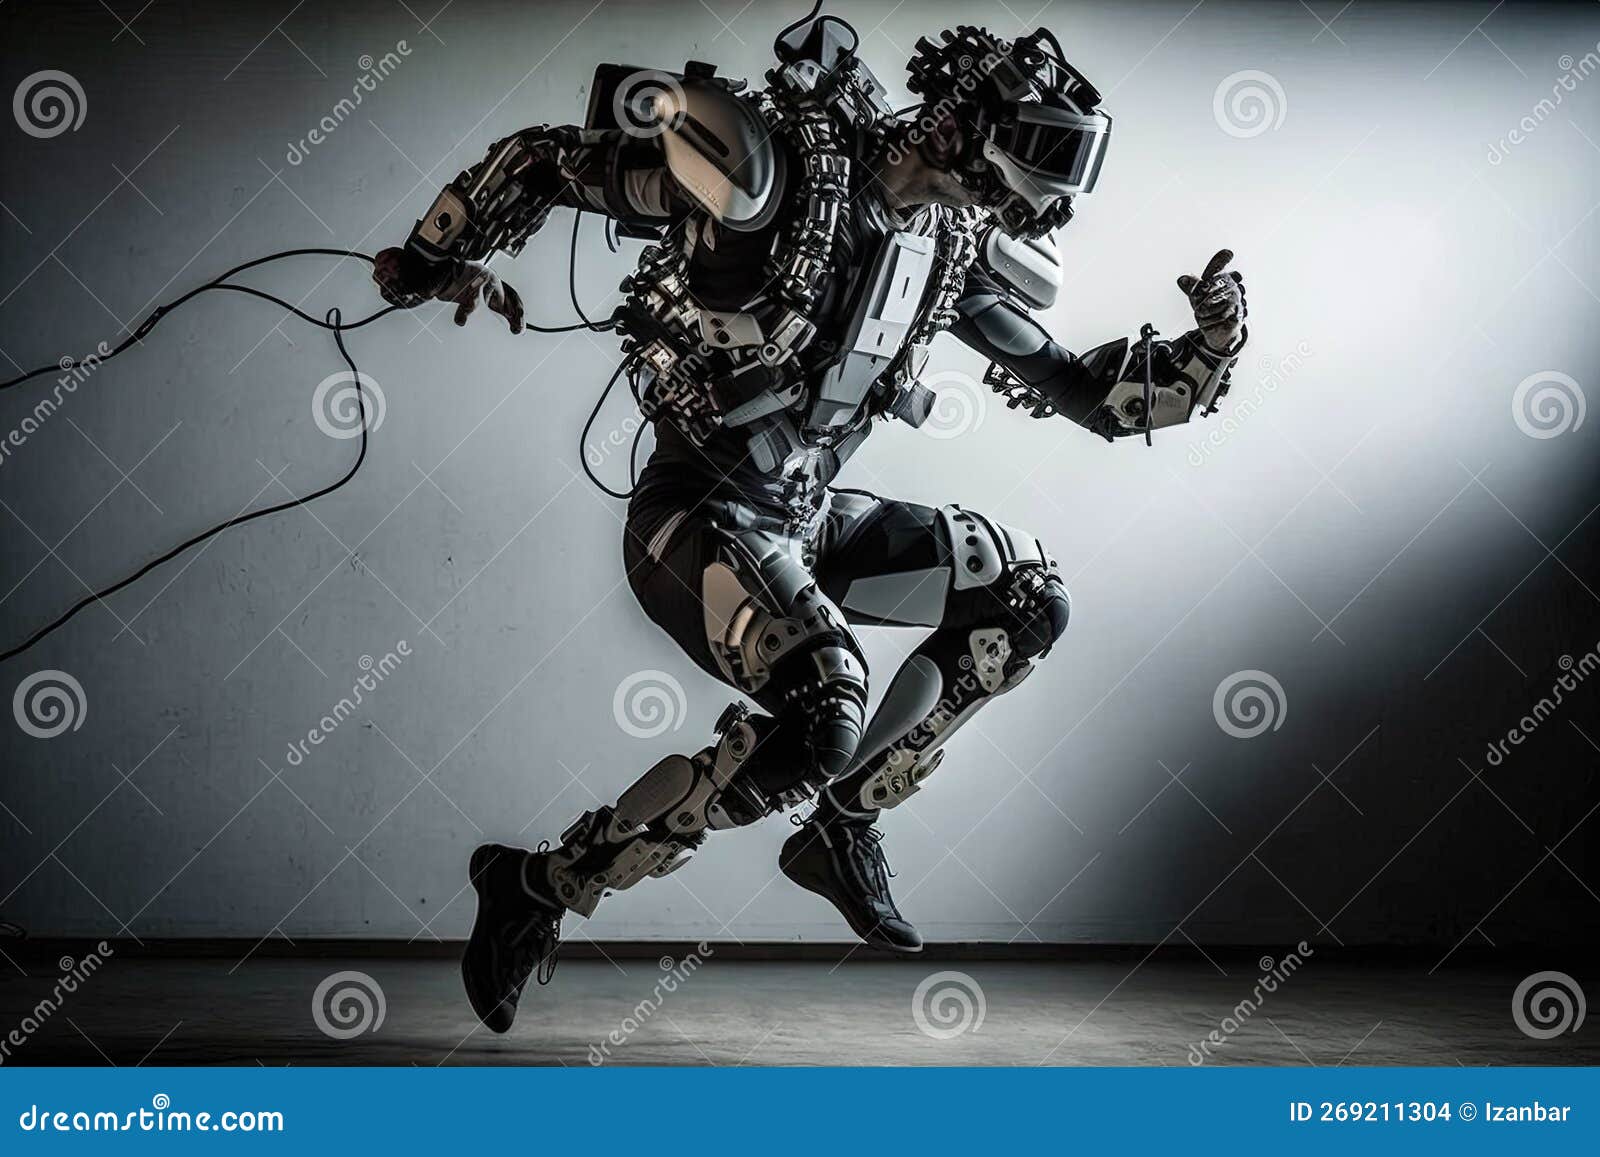 telekinesis suit of the future: advanced exosuit that amplify the wearer physical abilities, allowing them to move objects and